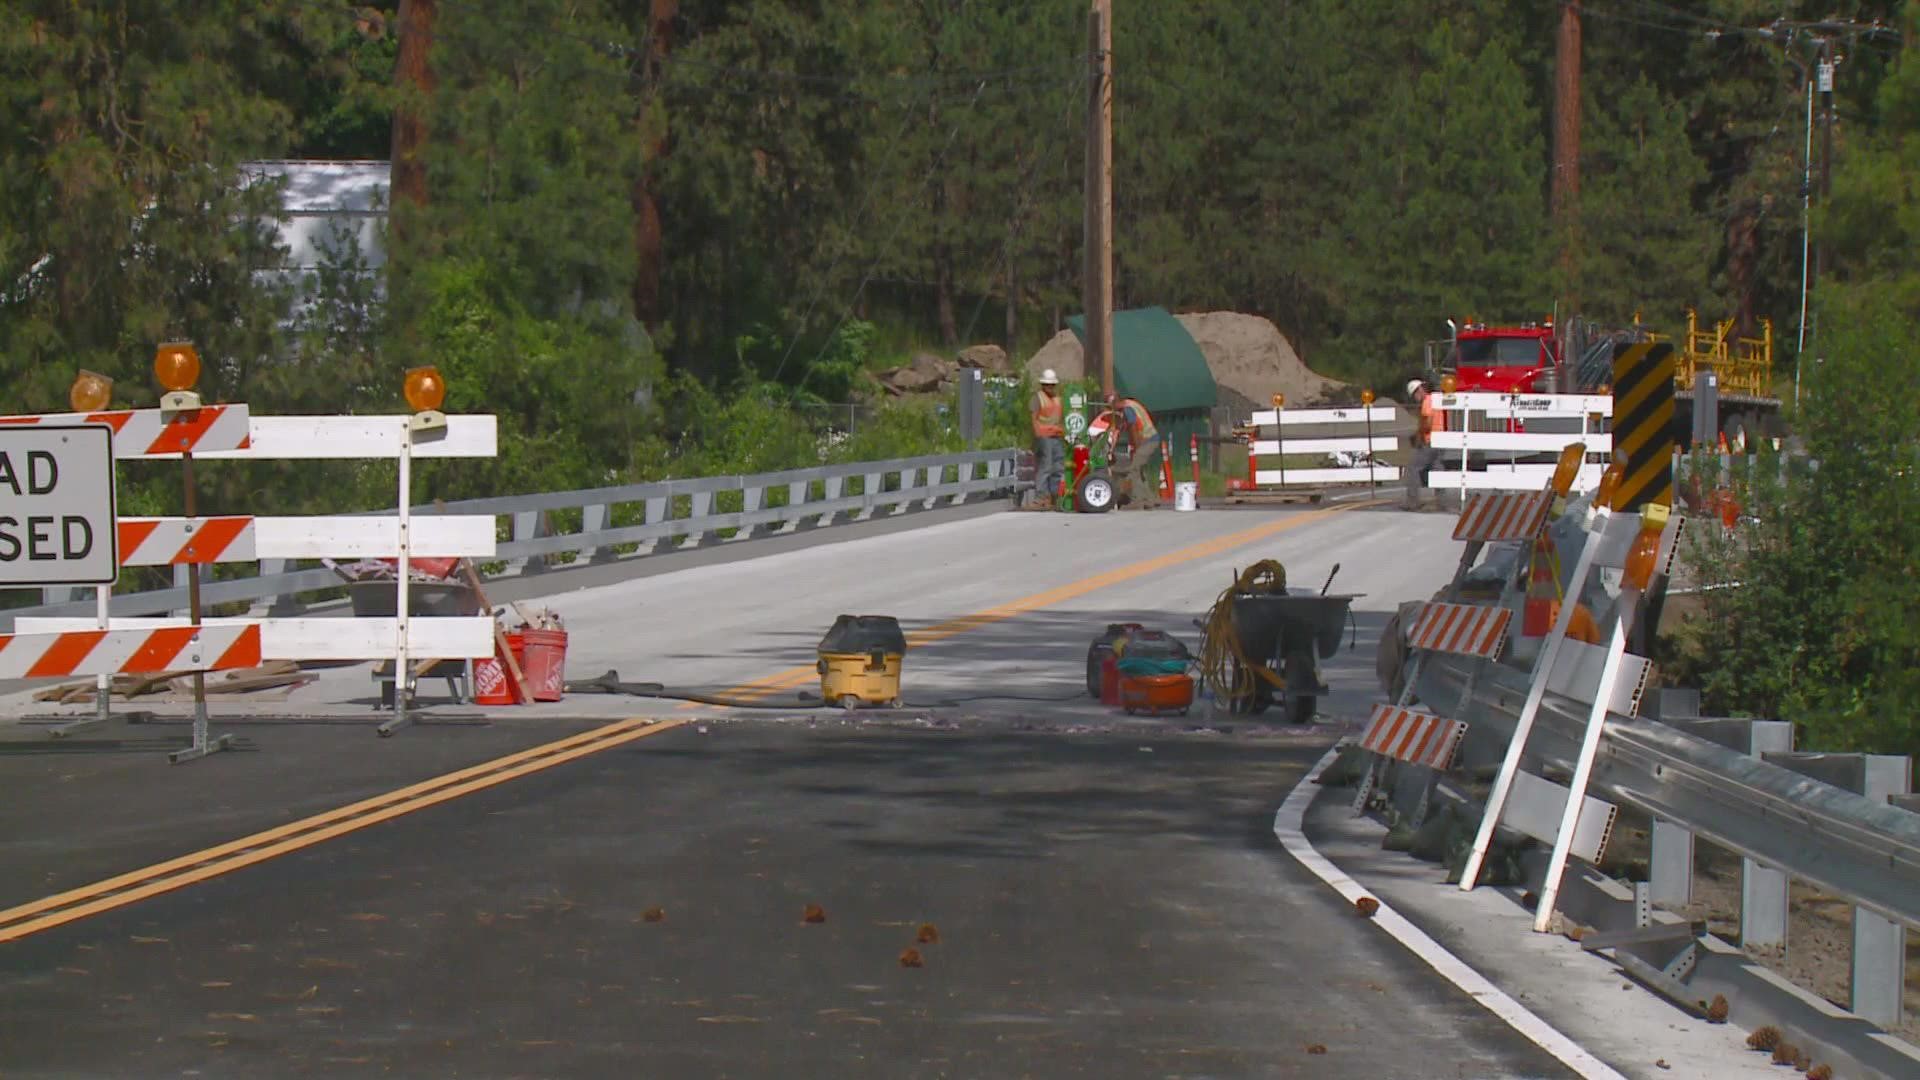 Spokane city officials said the bridge will reopen in early next week.